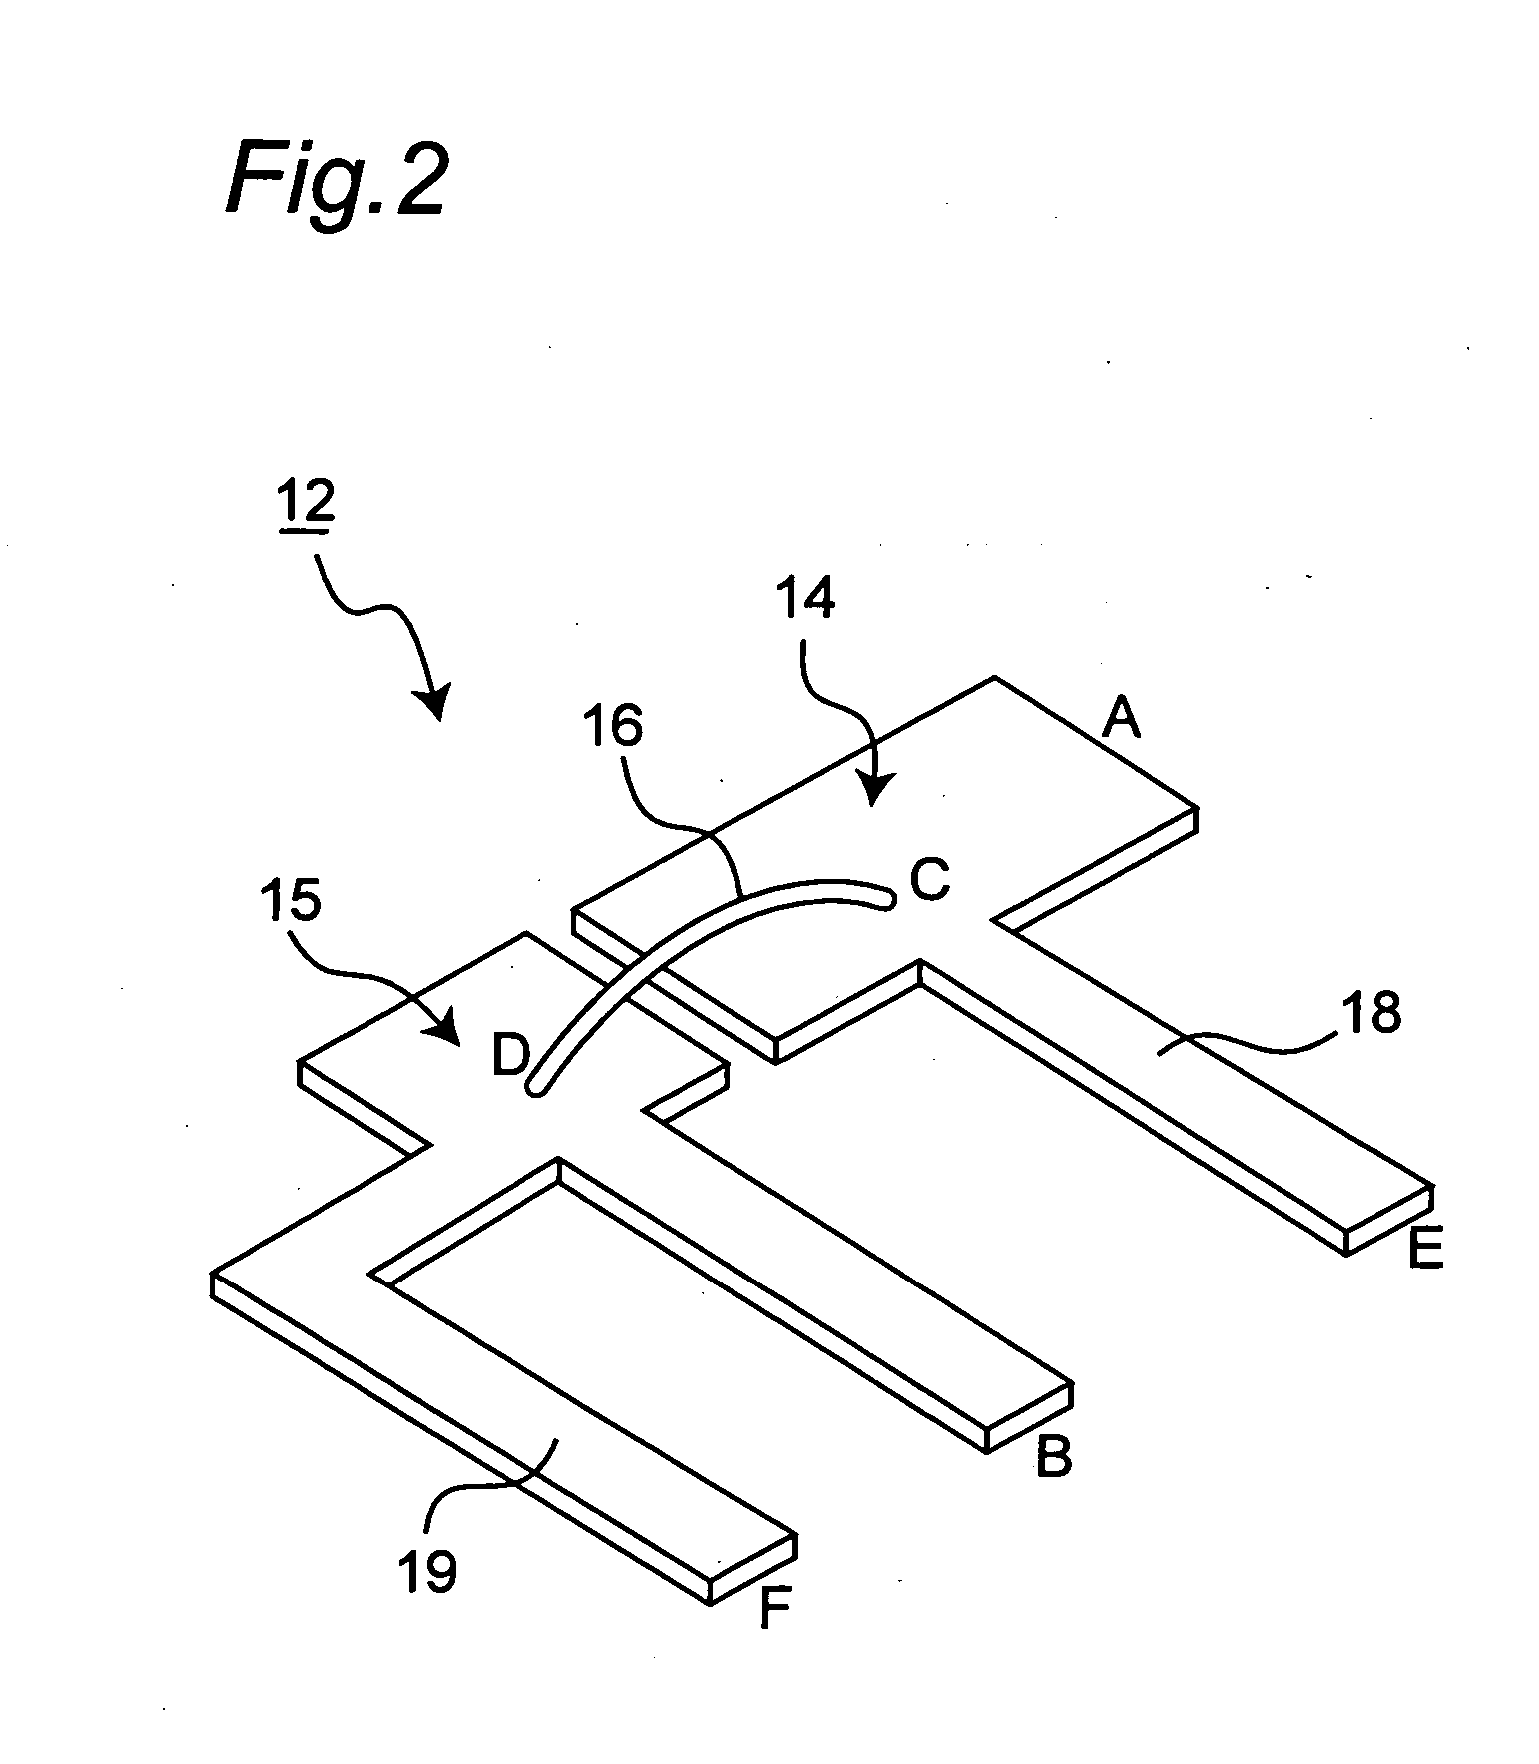 Power semiconductor module with detector for detecting main circuit current through power semiconductor element